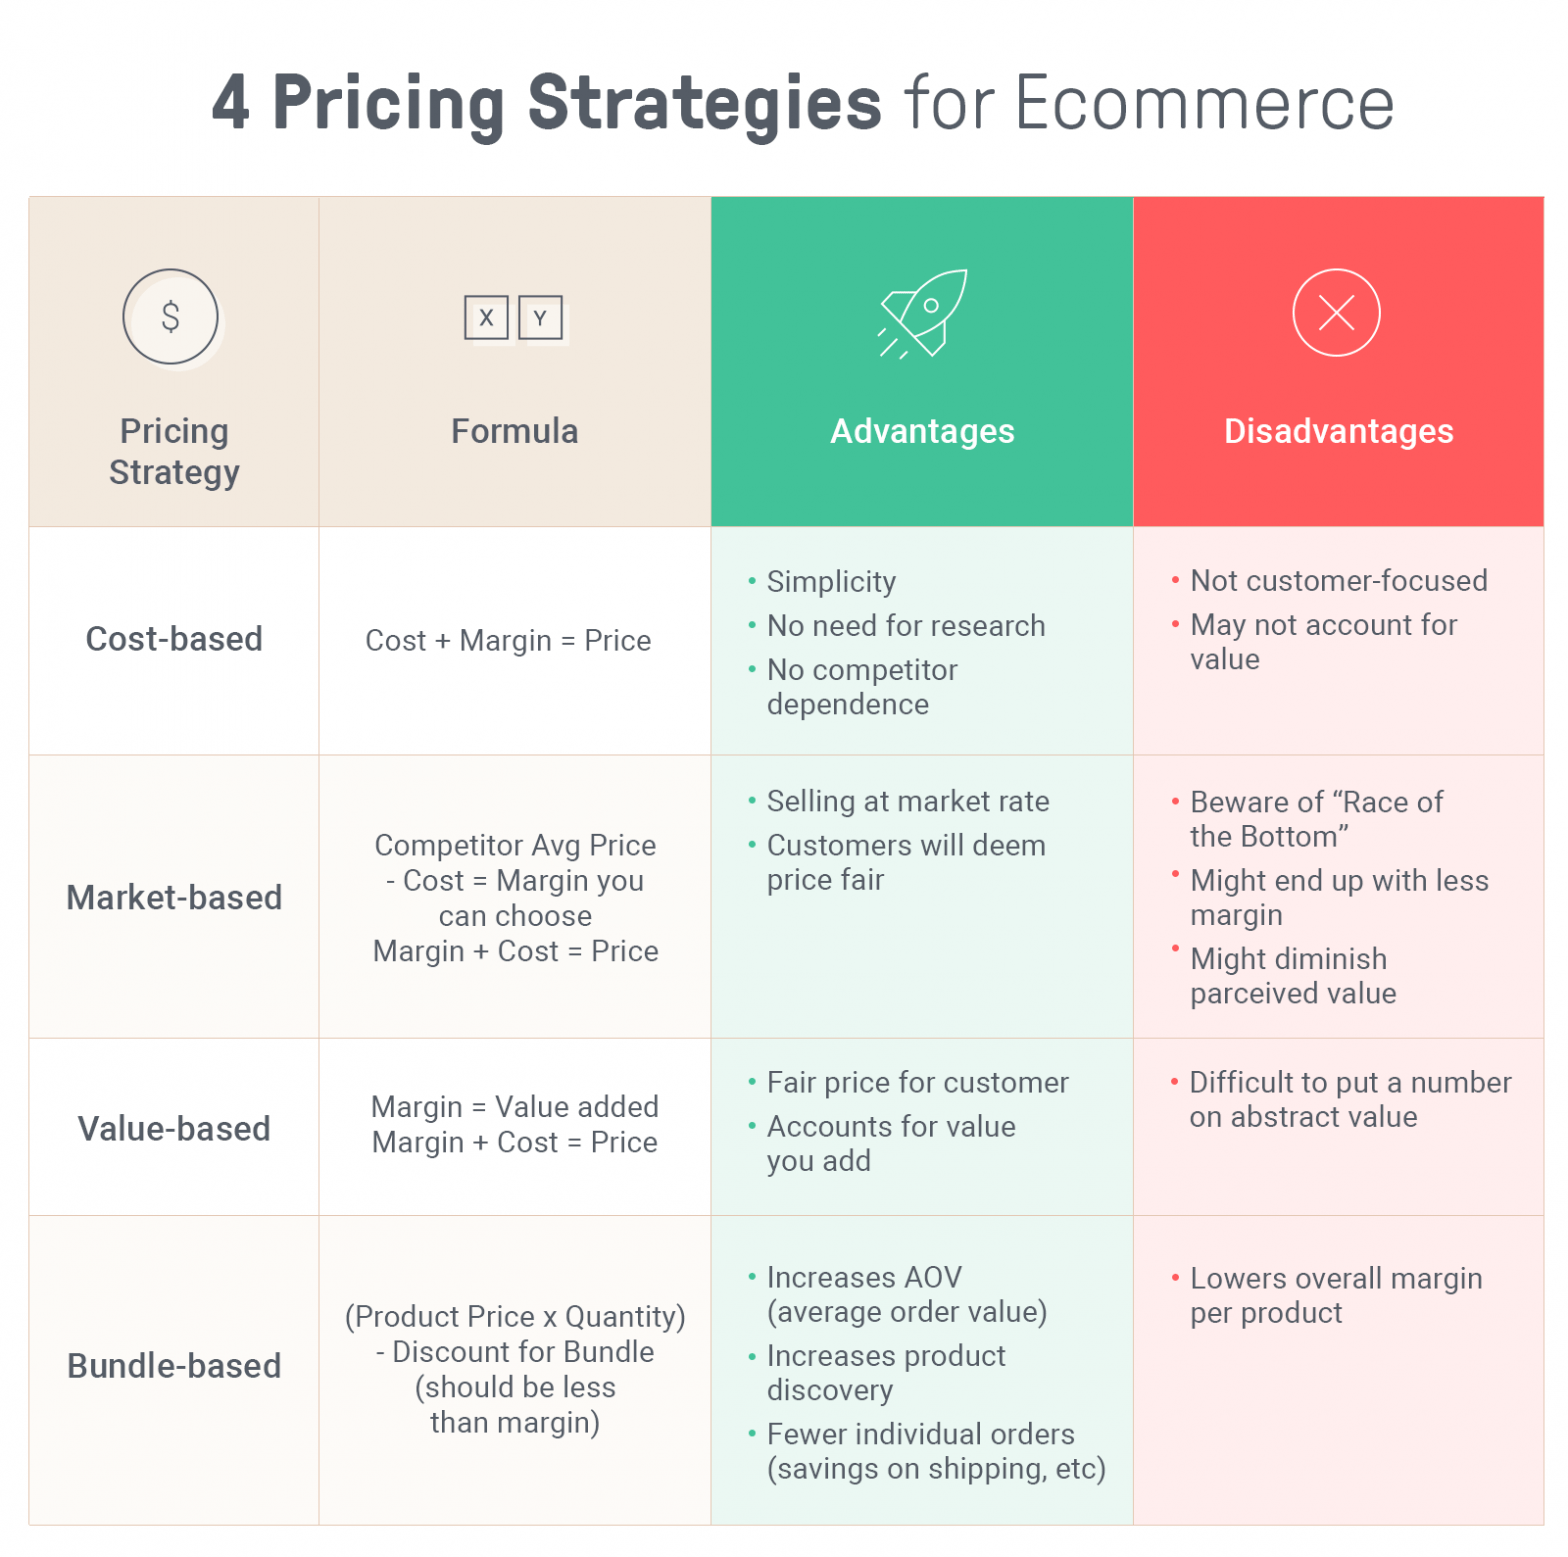 pricing-strategy-meaning-importance-types-factors-example-mba-photos